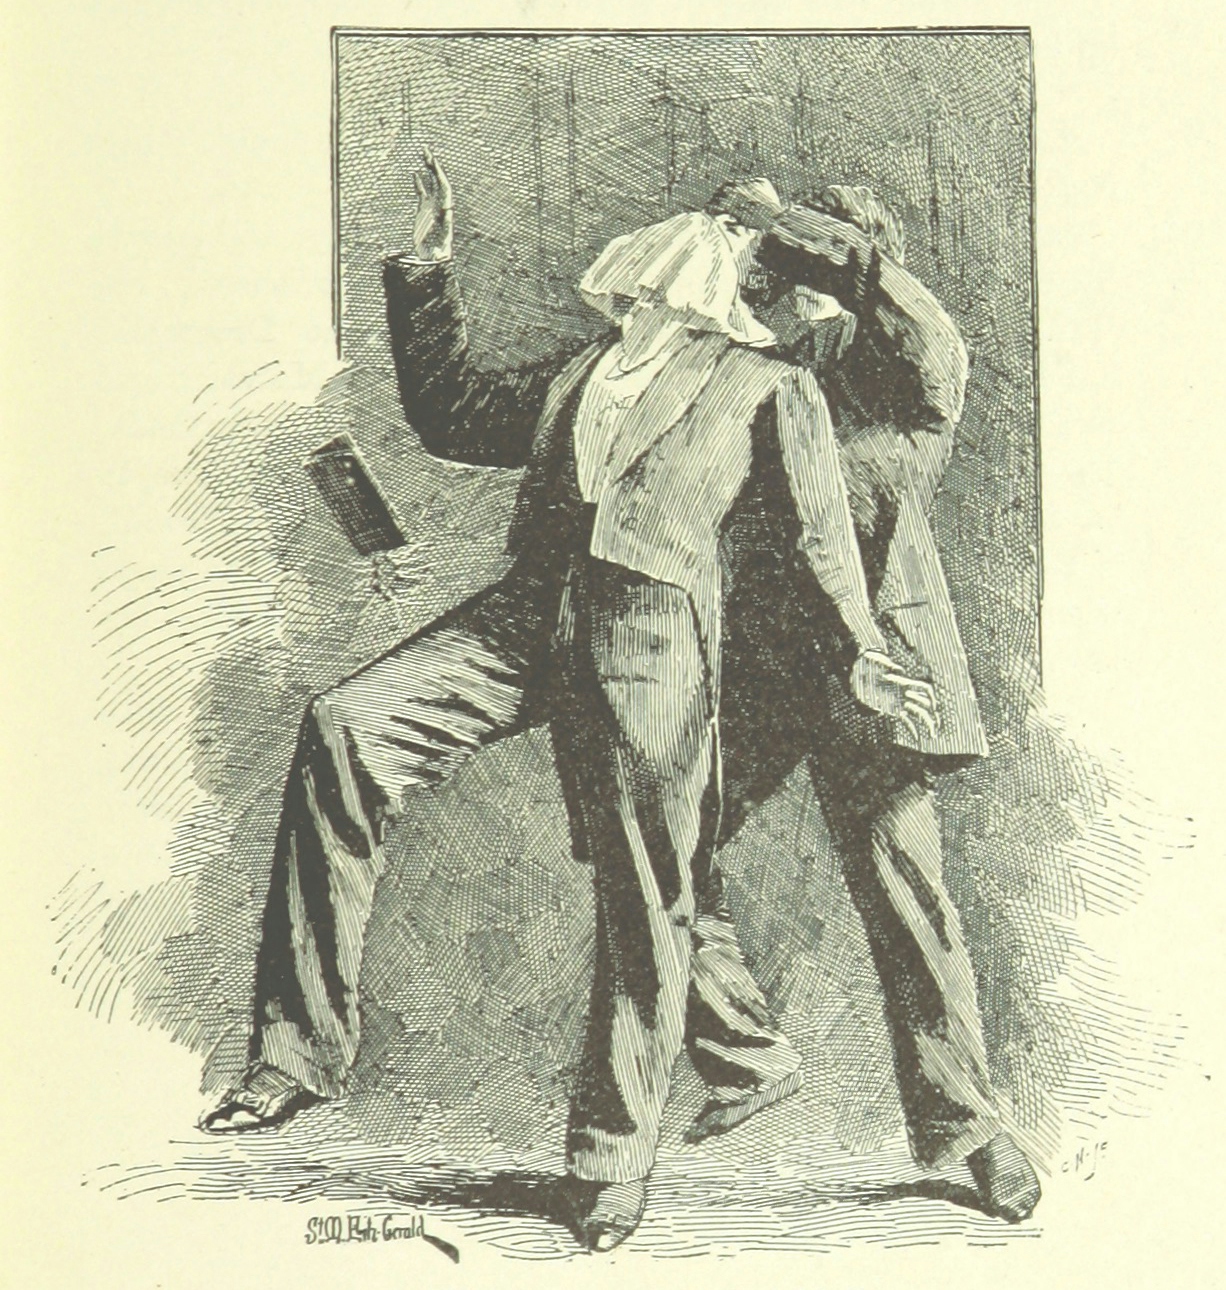 Black and white book illustration showing a man being attacked by another man, who holds a large hanky over his victim’s face